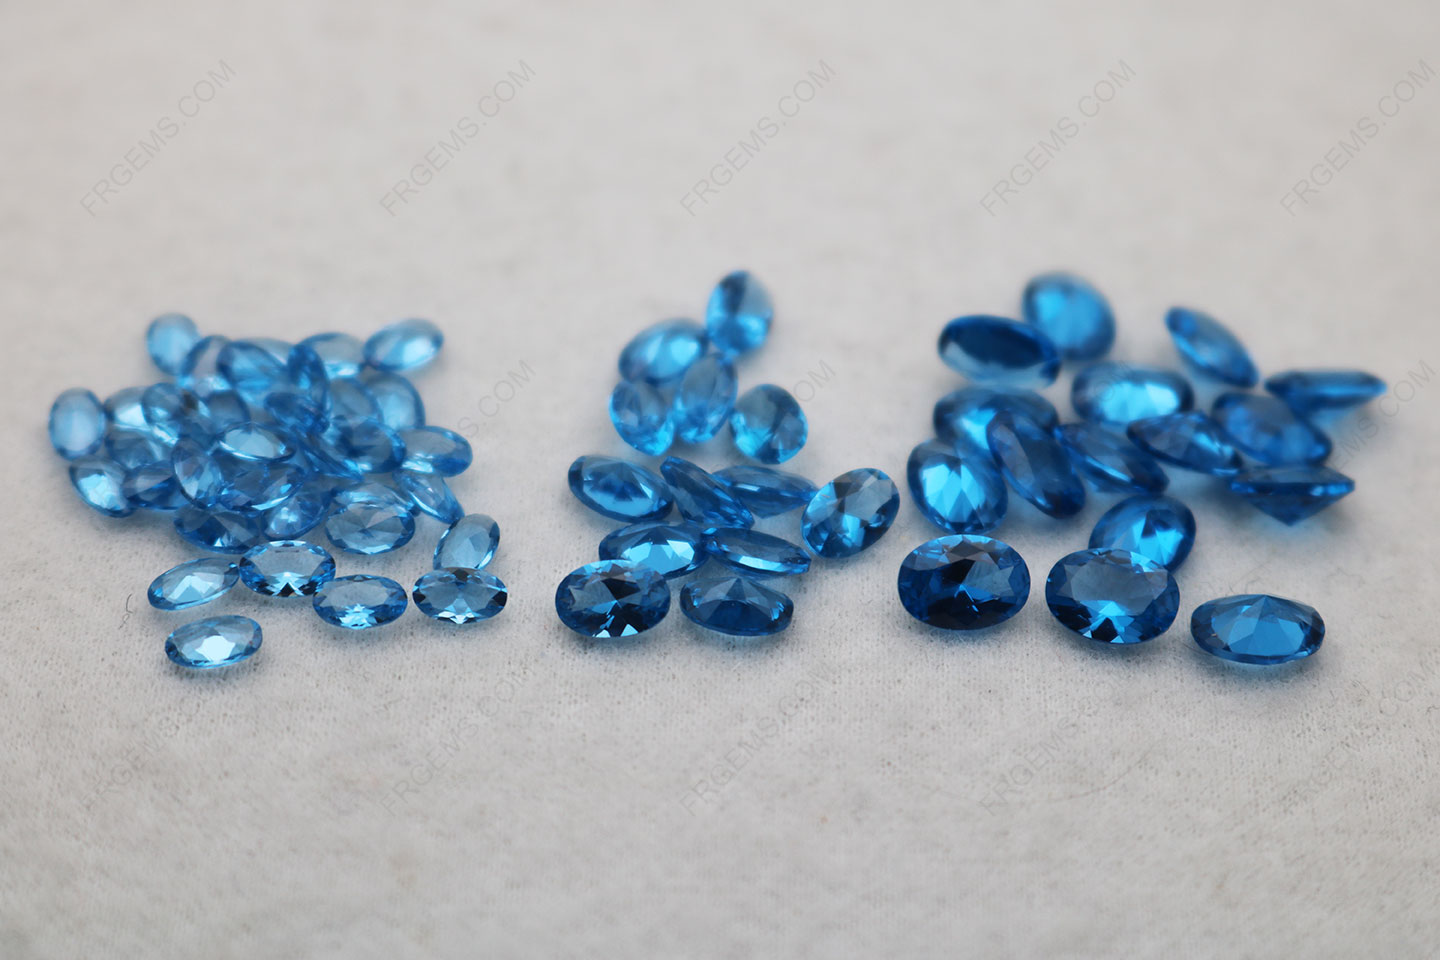 Wholesale Synthetic Spinel #119 Blue Oval Shape Faceted Cut gemstones